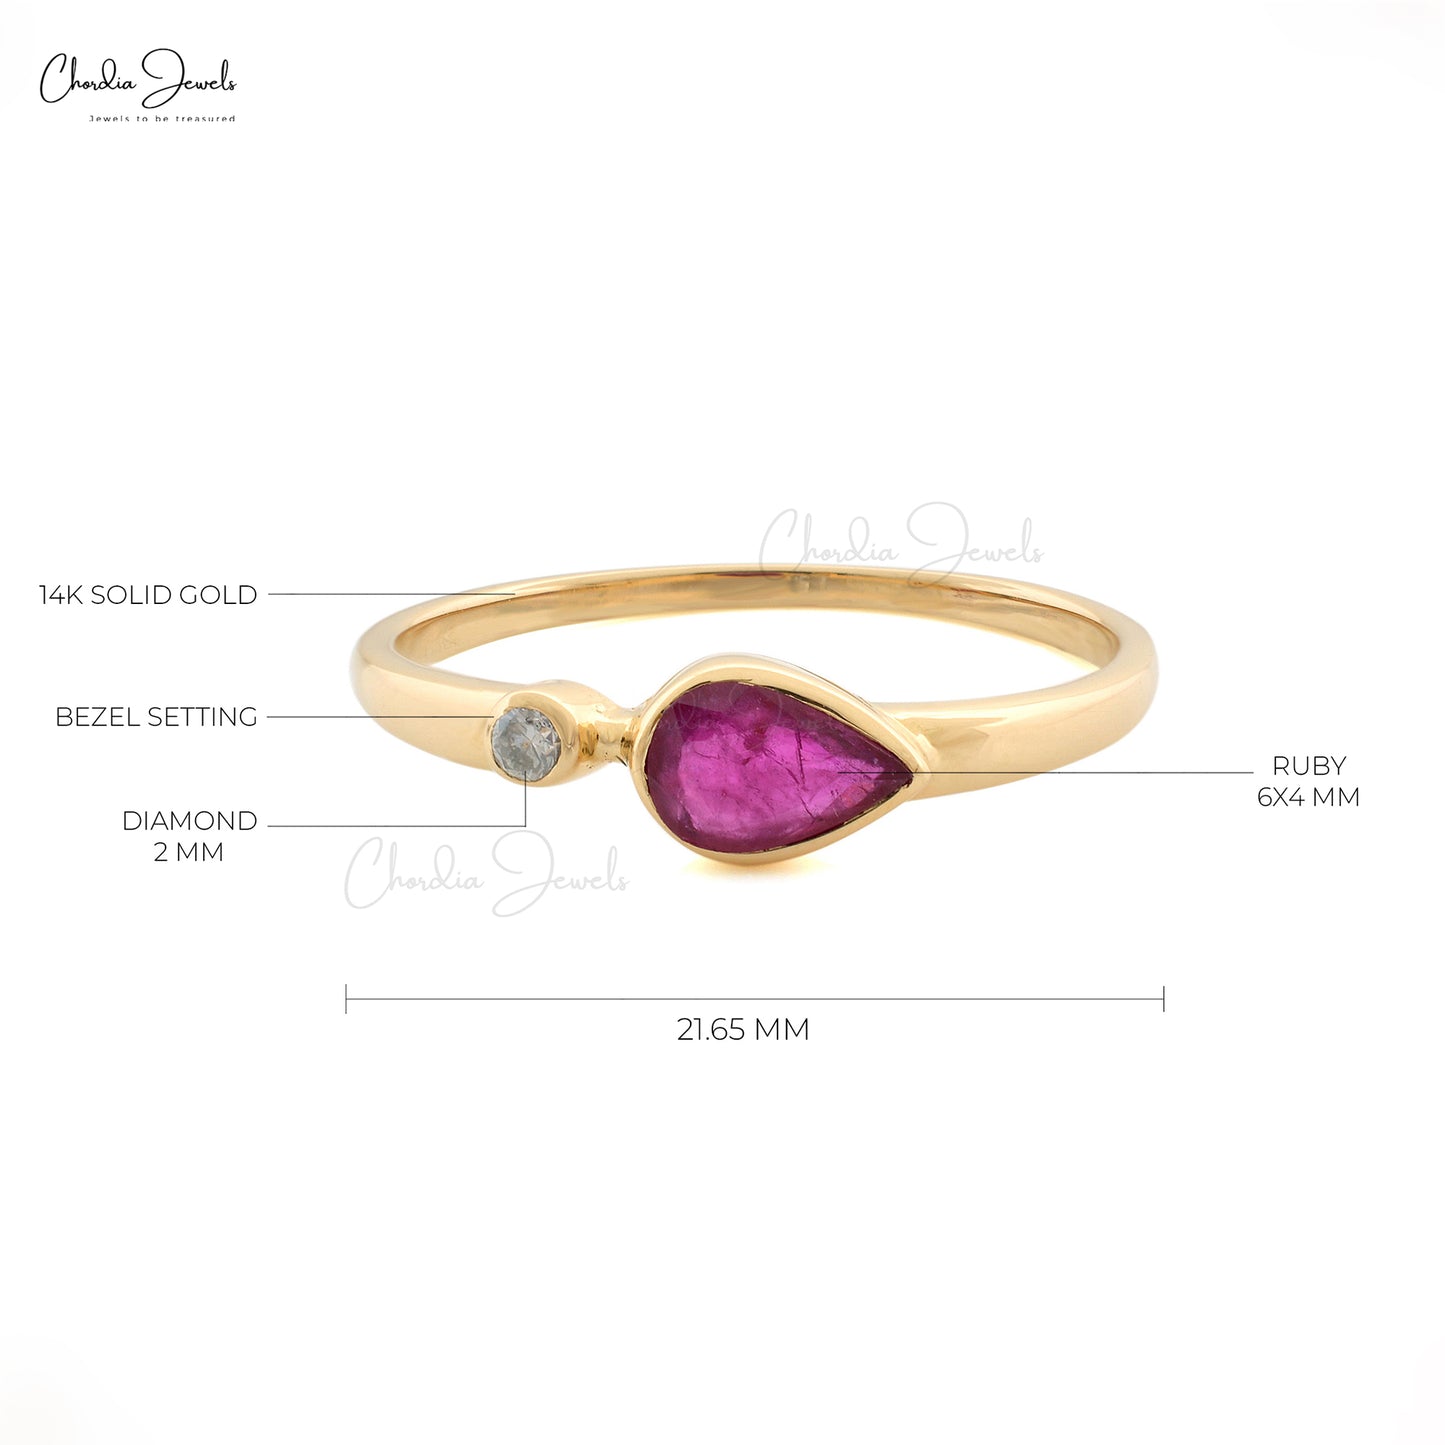 Authentic Ruby 0.41 Carats Pear Cut Gemstone Band  14k Solid Yellow Gold White Diamond Proposal Ring